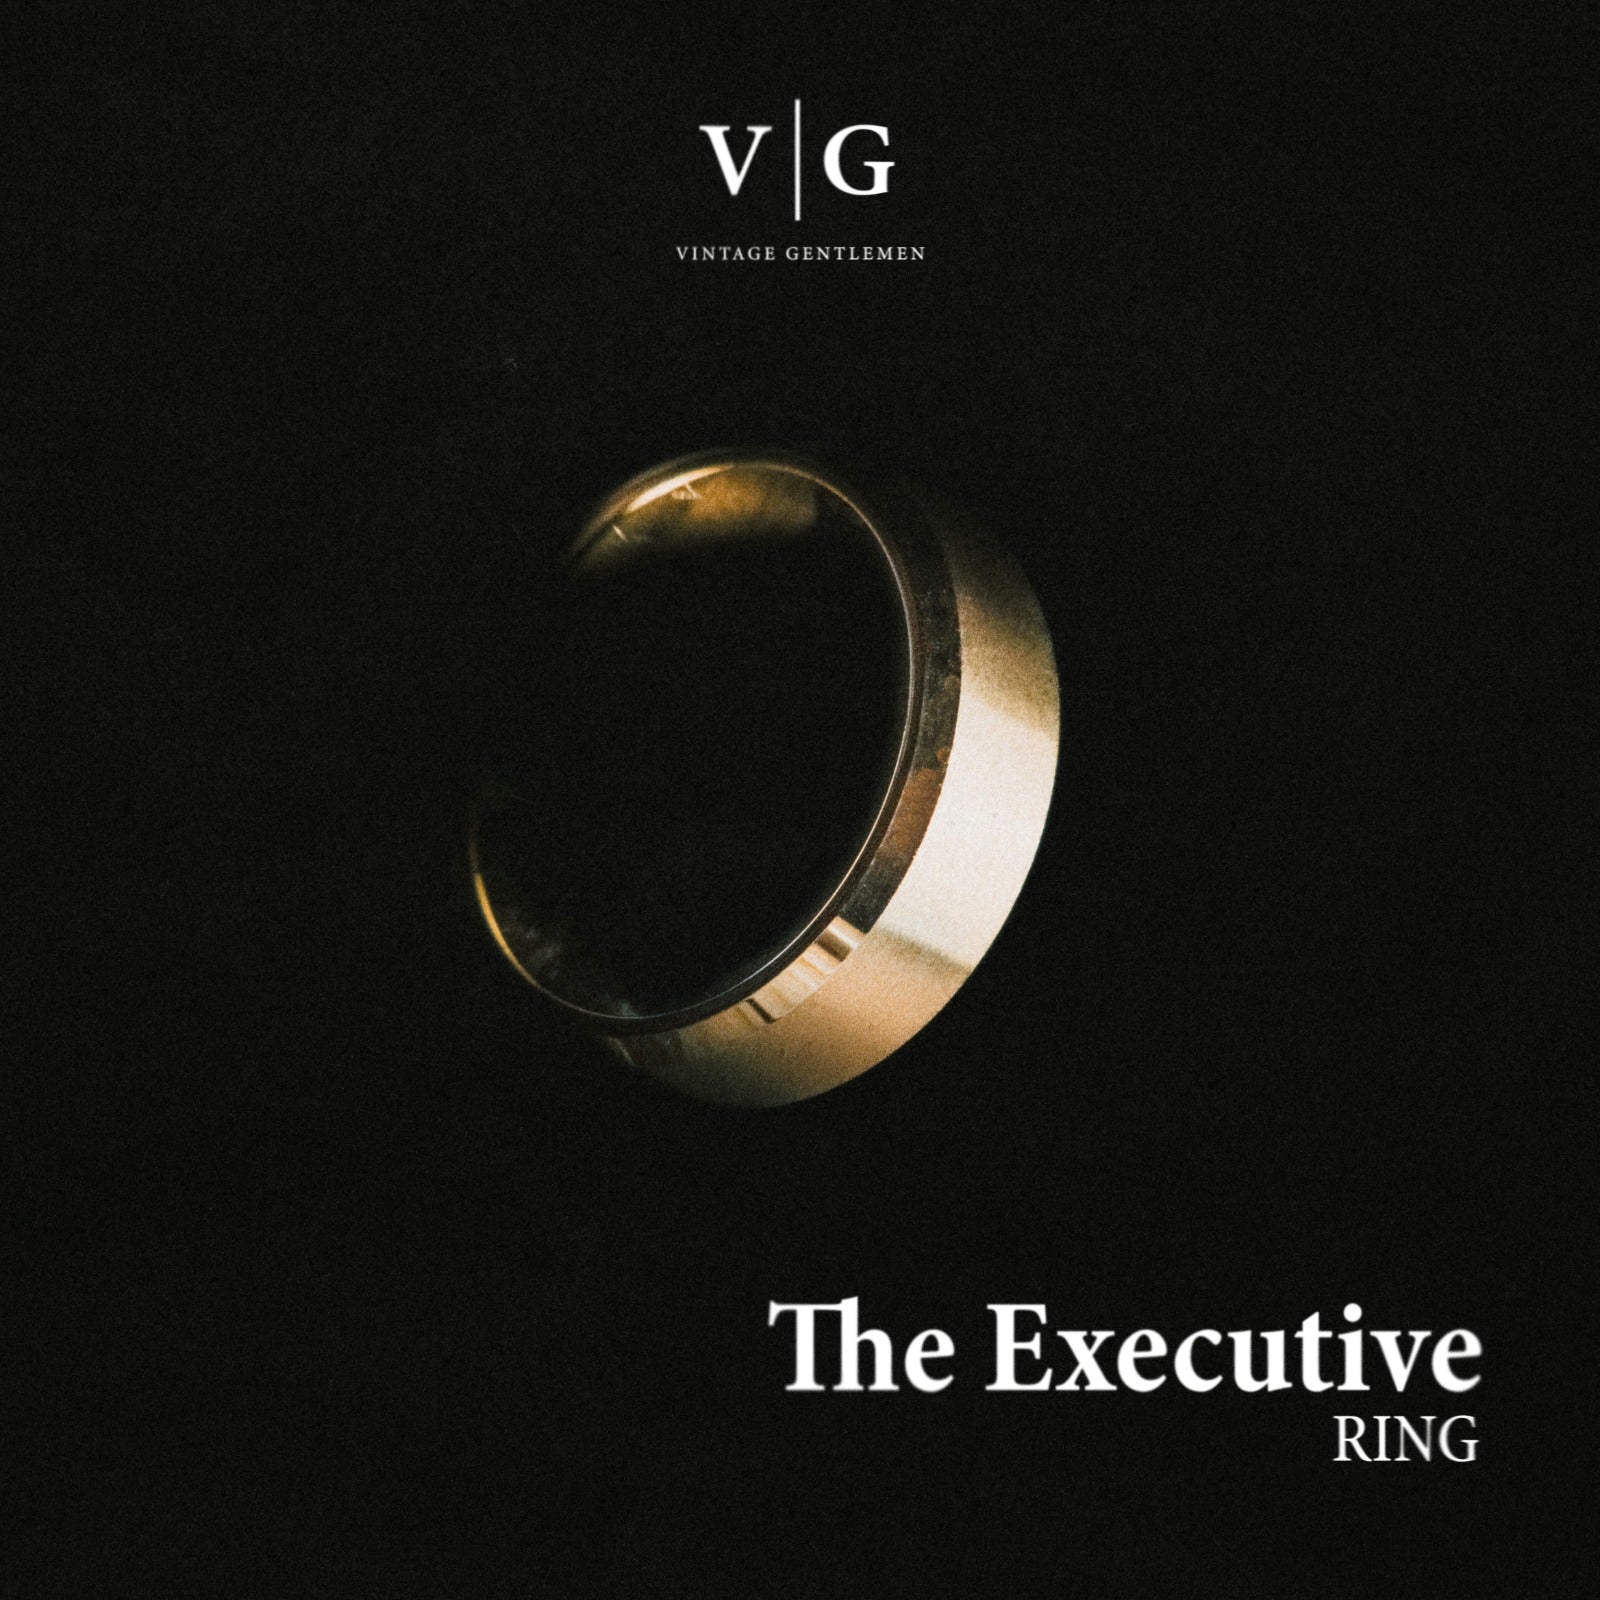 The “Executive” Ring